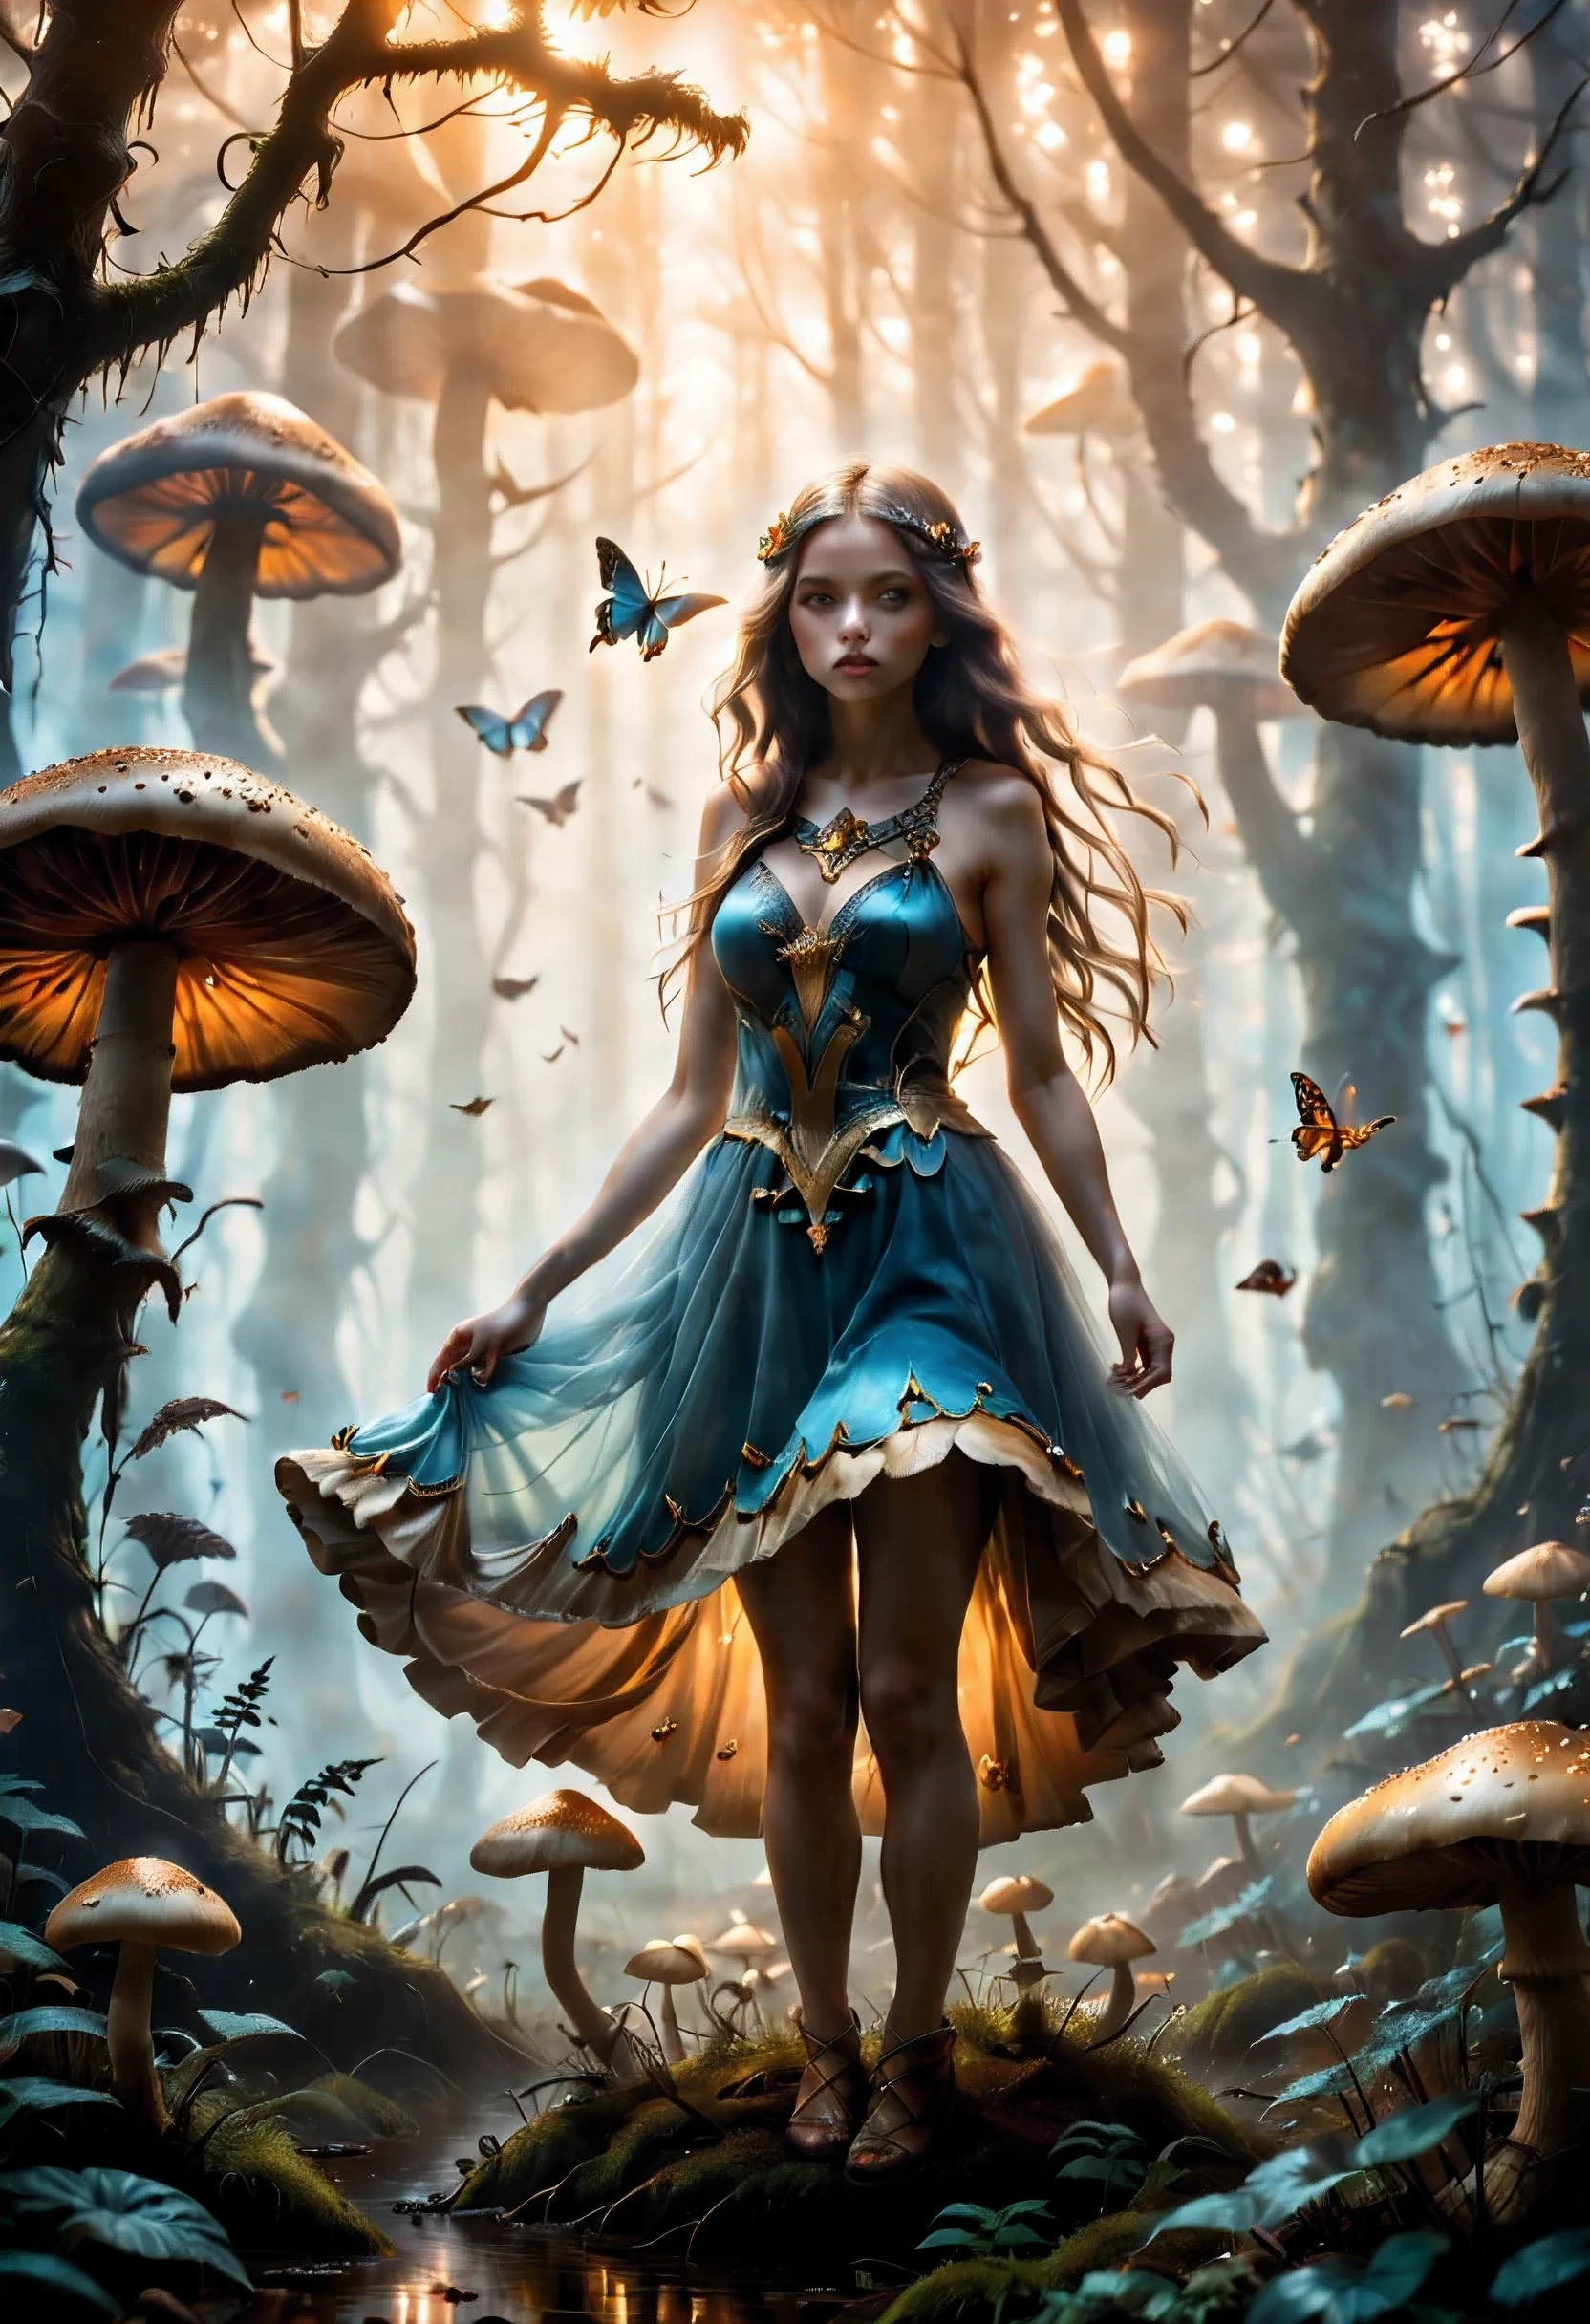 "Golden hour photography, girl in the mystic mist, colossal mushroom, graceful butterflies, otherworldly magic, rule of thirds composition"